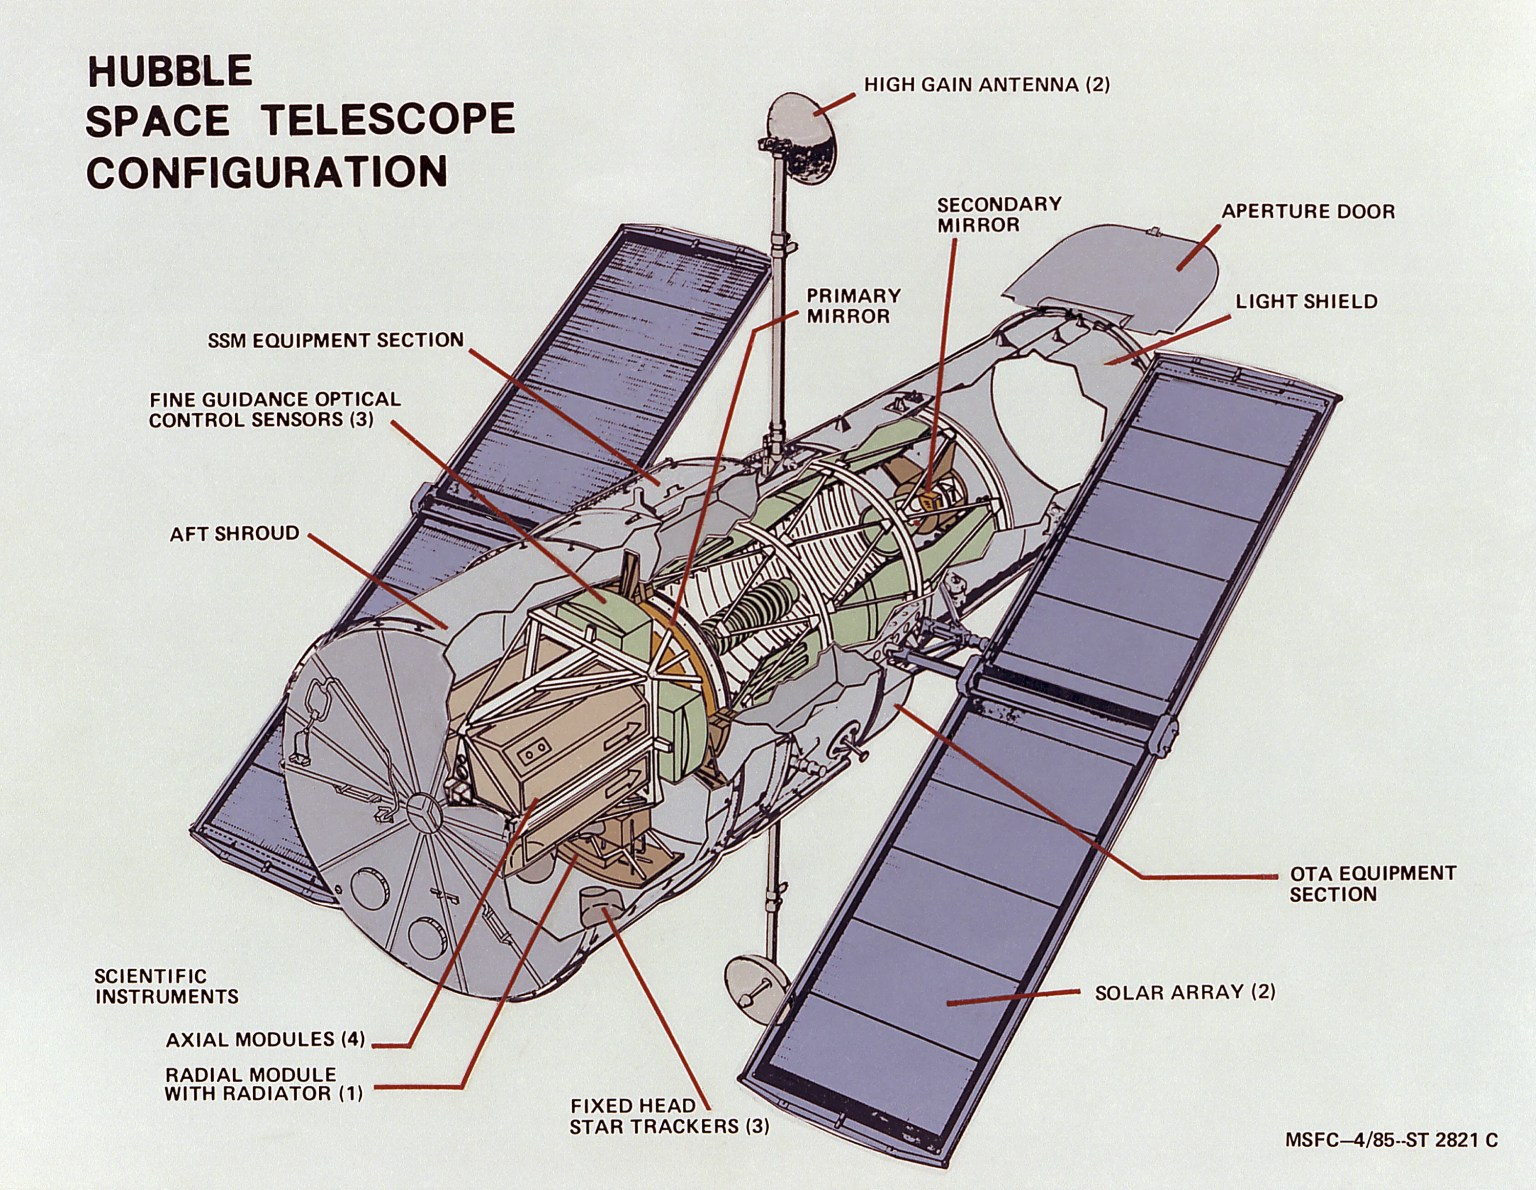 Illustrated diagram of the Hubble Space Telescope with labeling of instruments and components of the telescope.